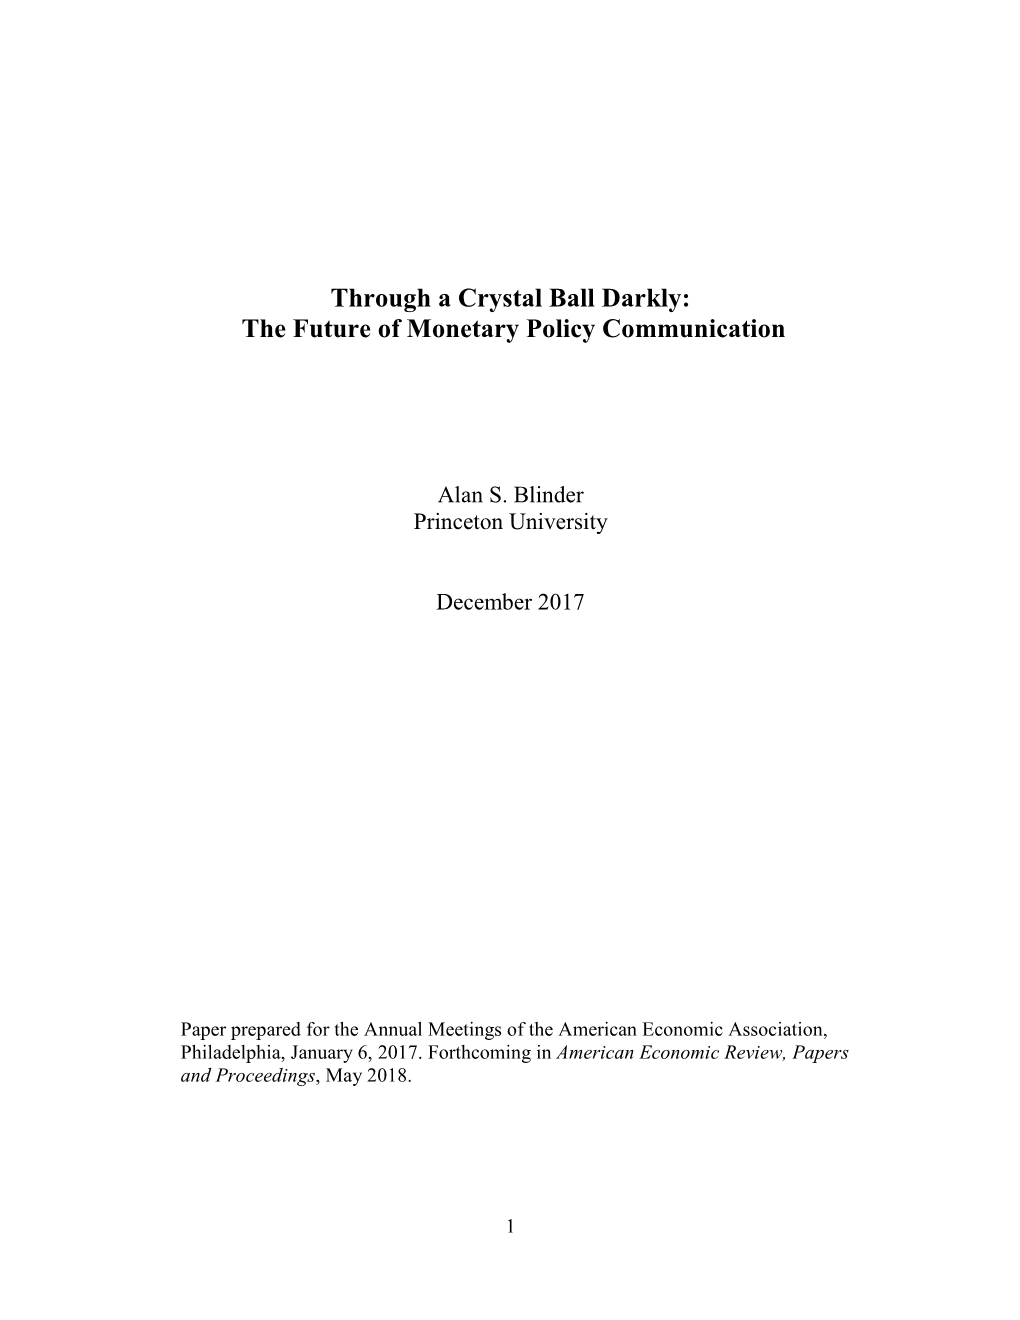 Through a Crystal Ball Darkly: the Future of Monetary Policy Communication